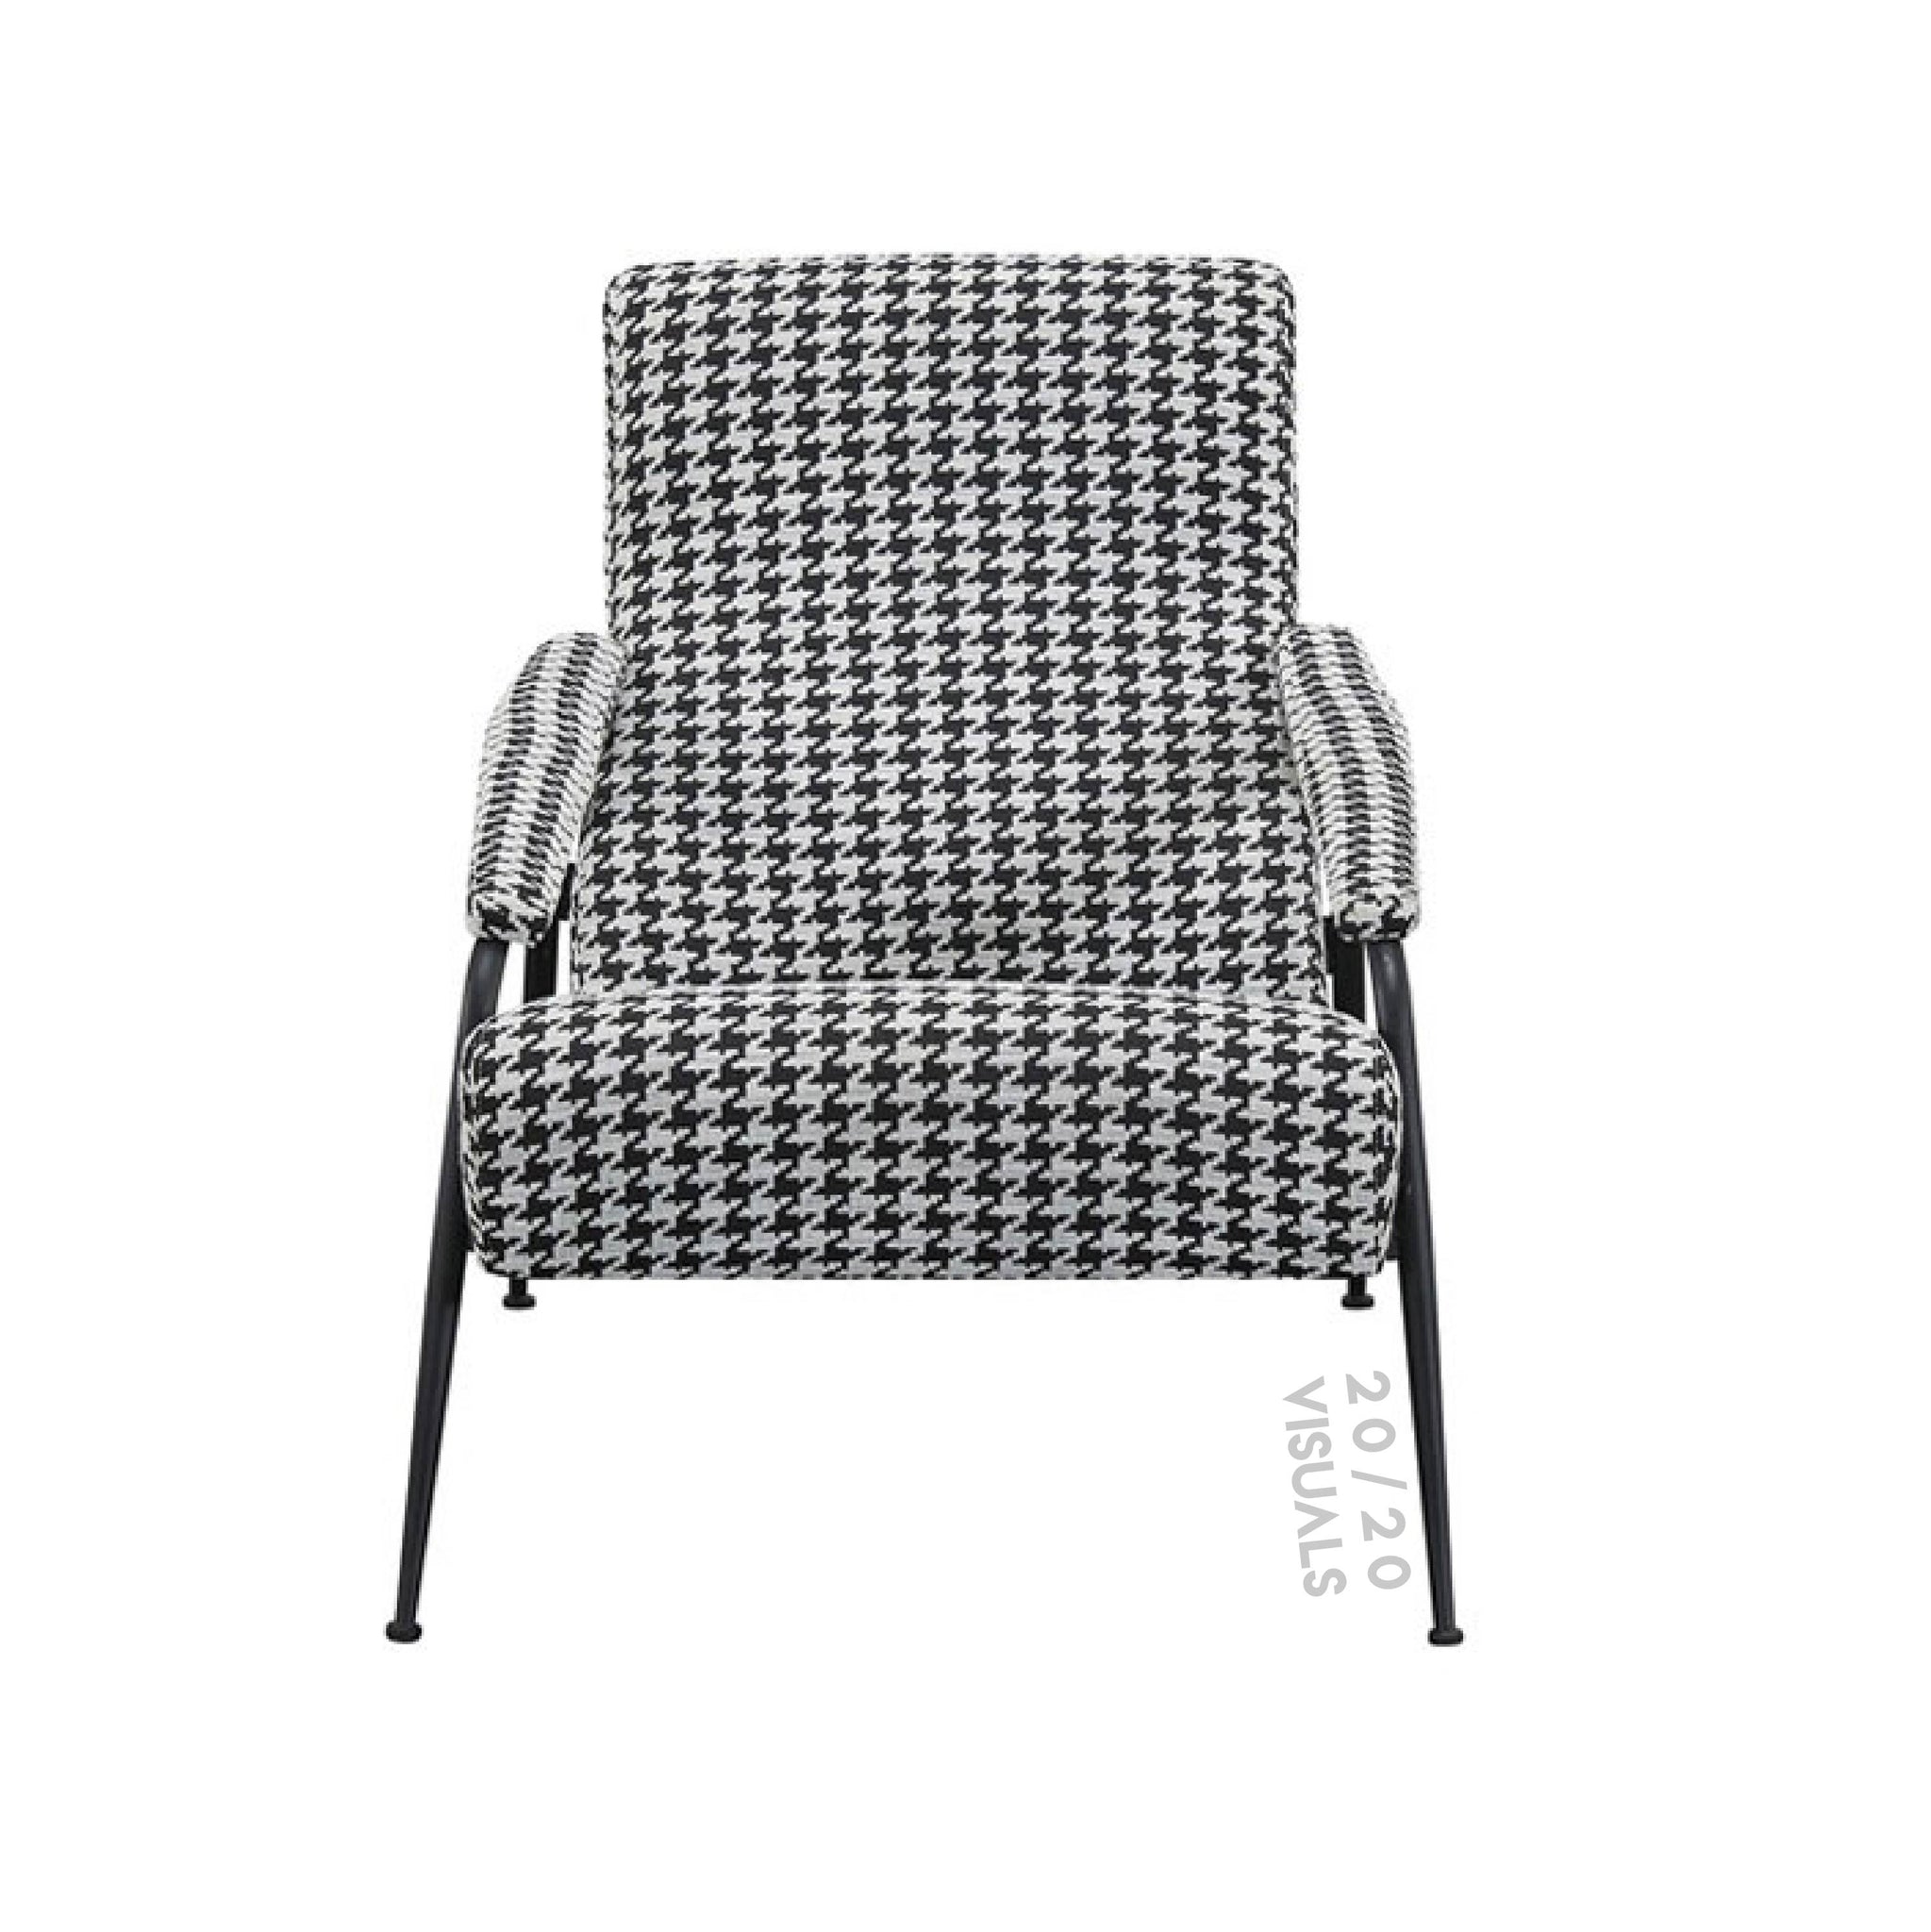 Houndstooth Lounge Chair